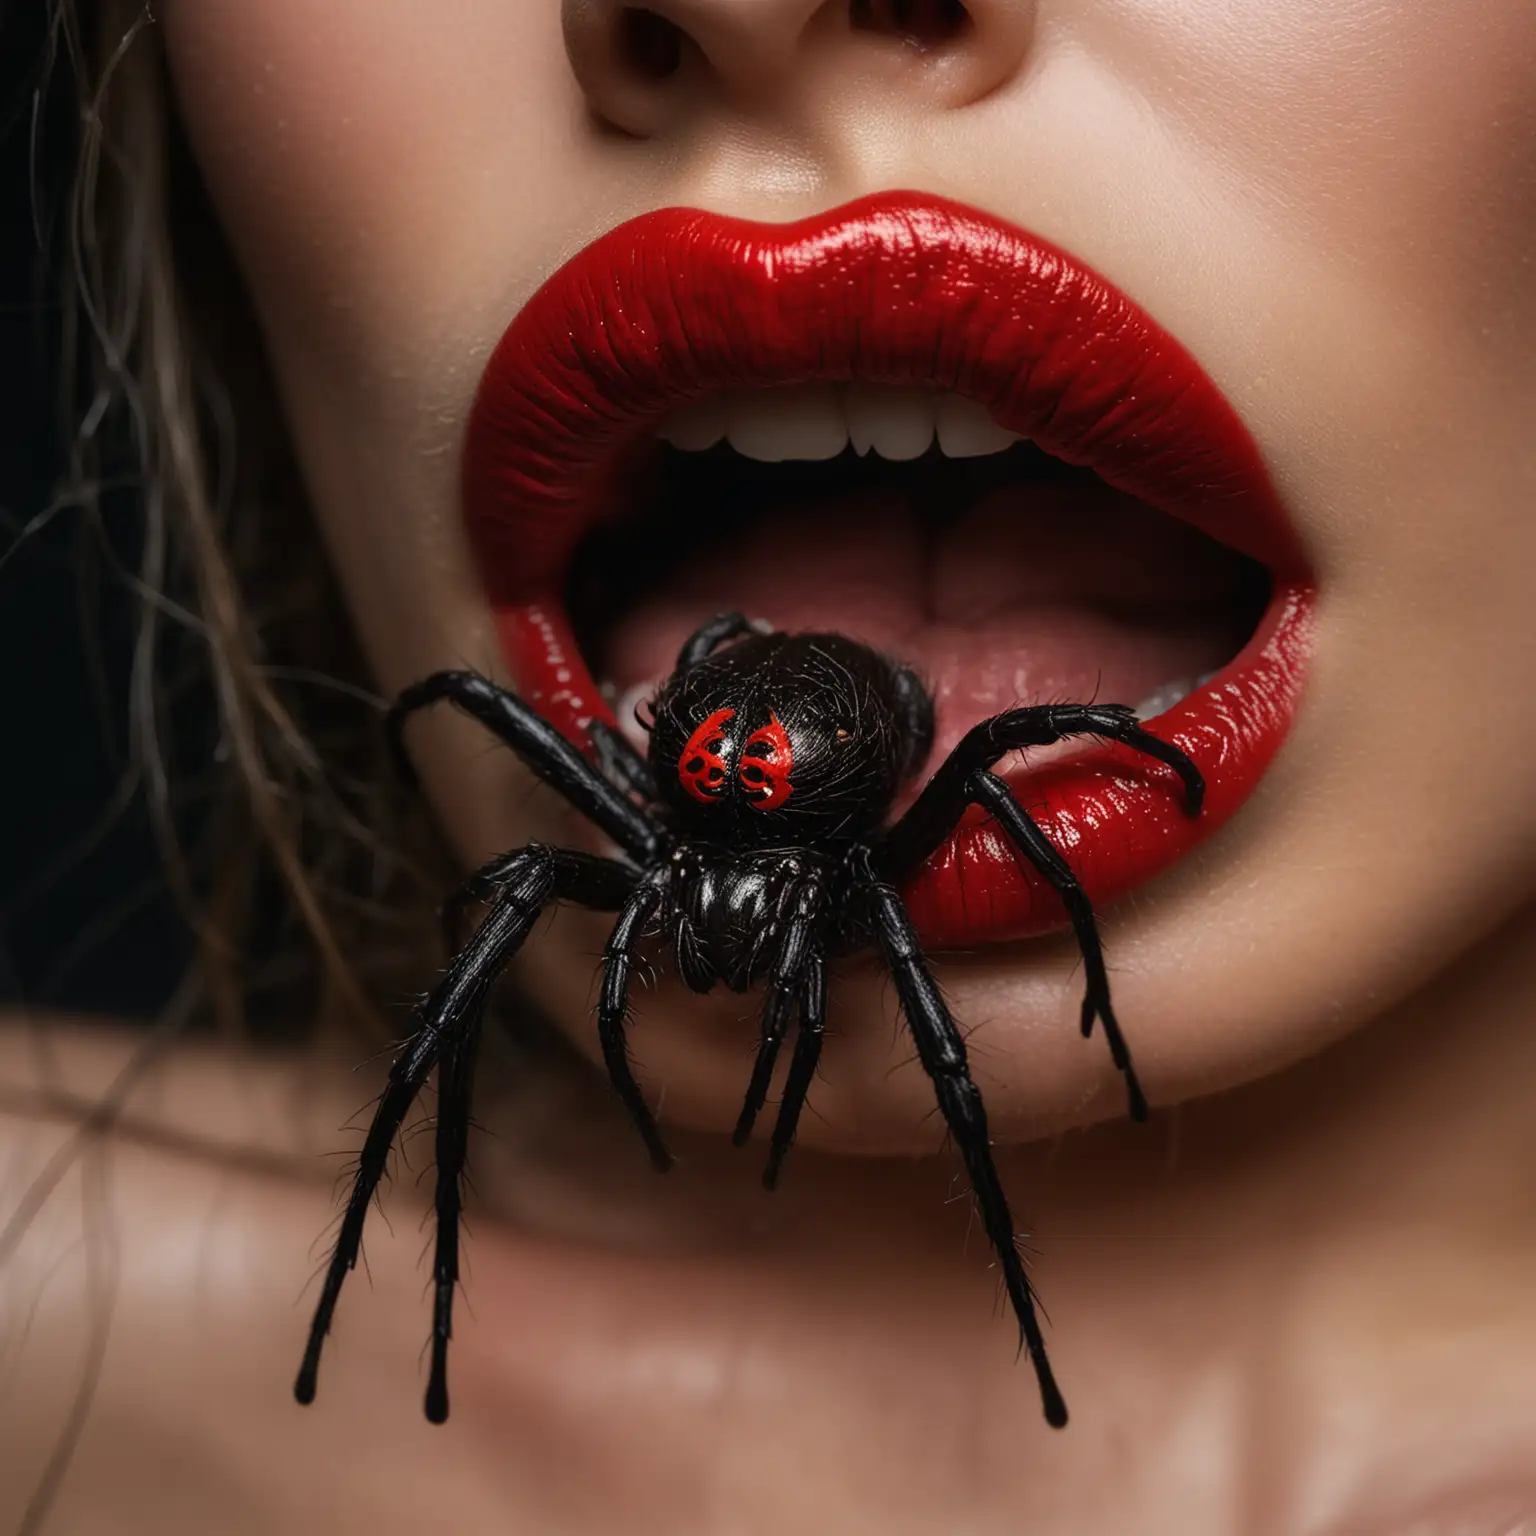 Dark scene intense, spider, erotic spider,  sexual, crawling on a womans red lips